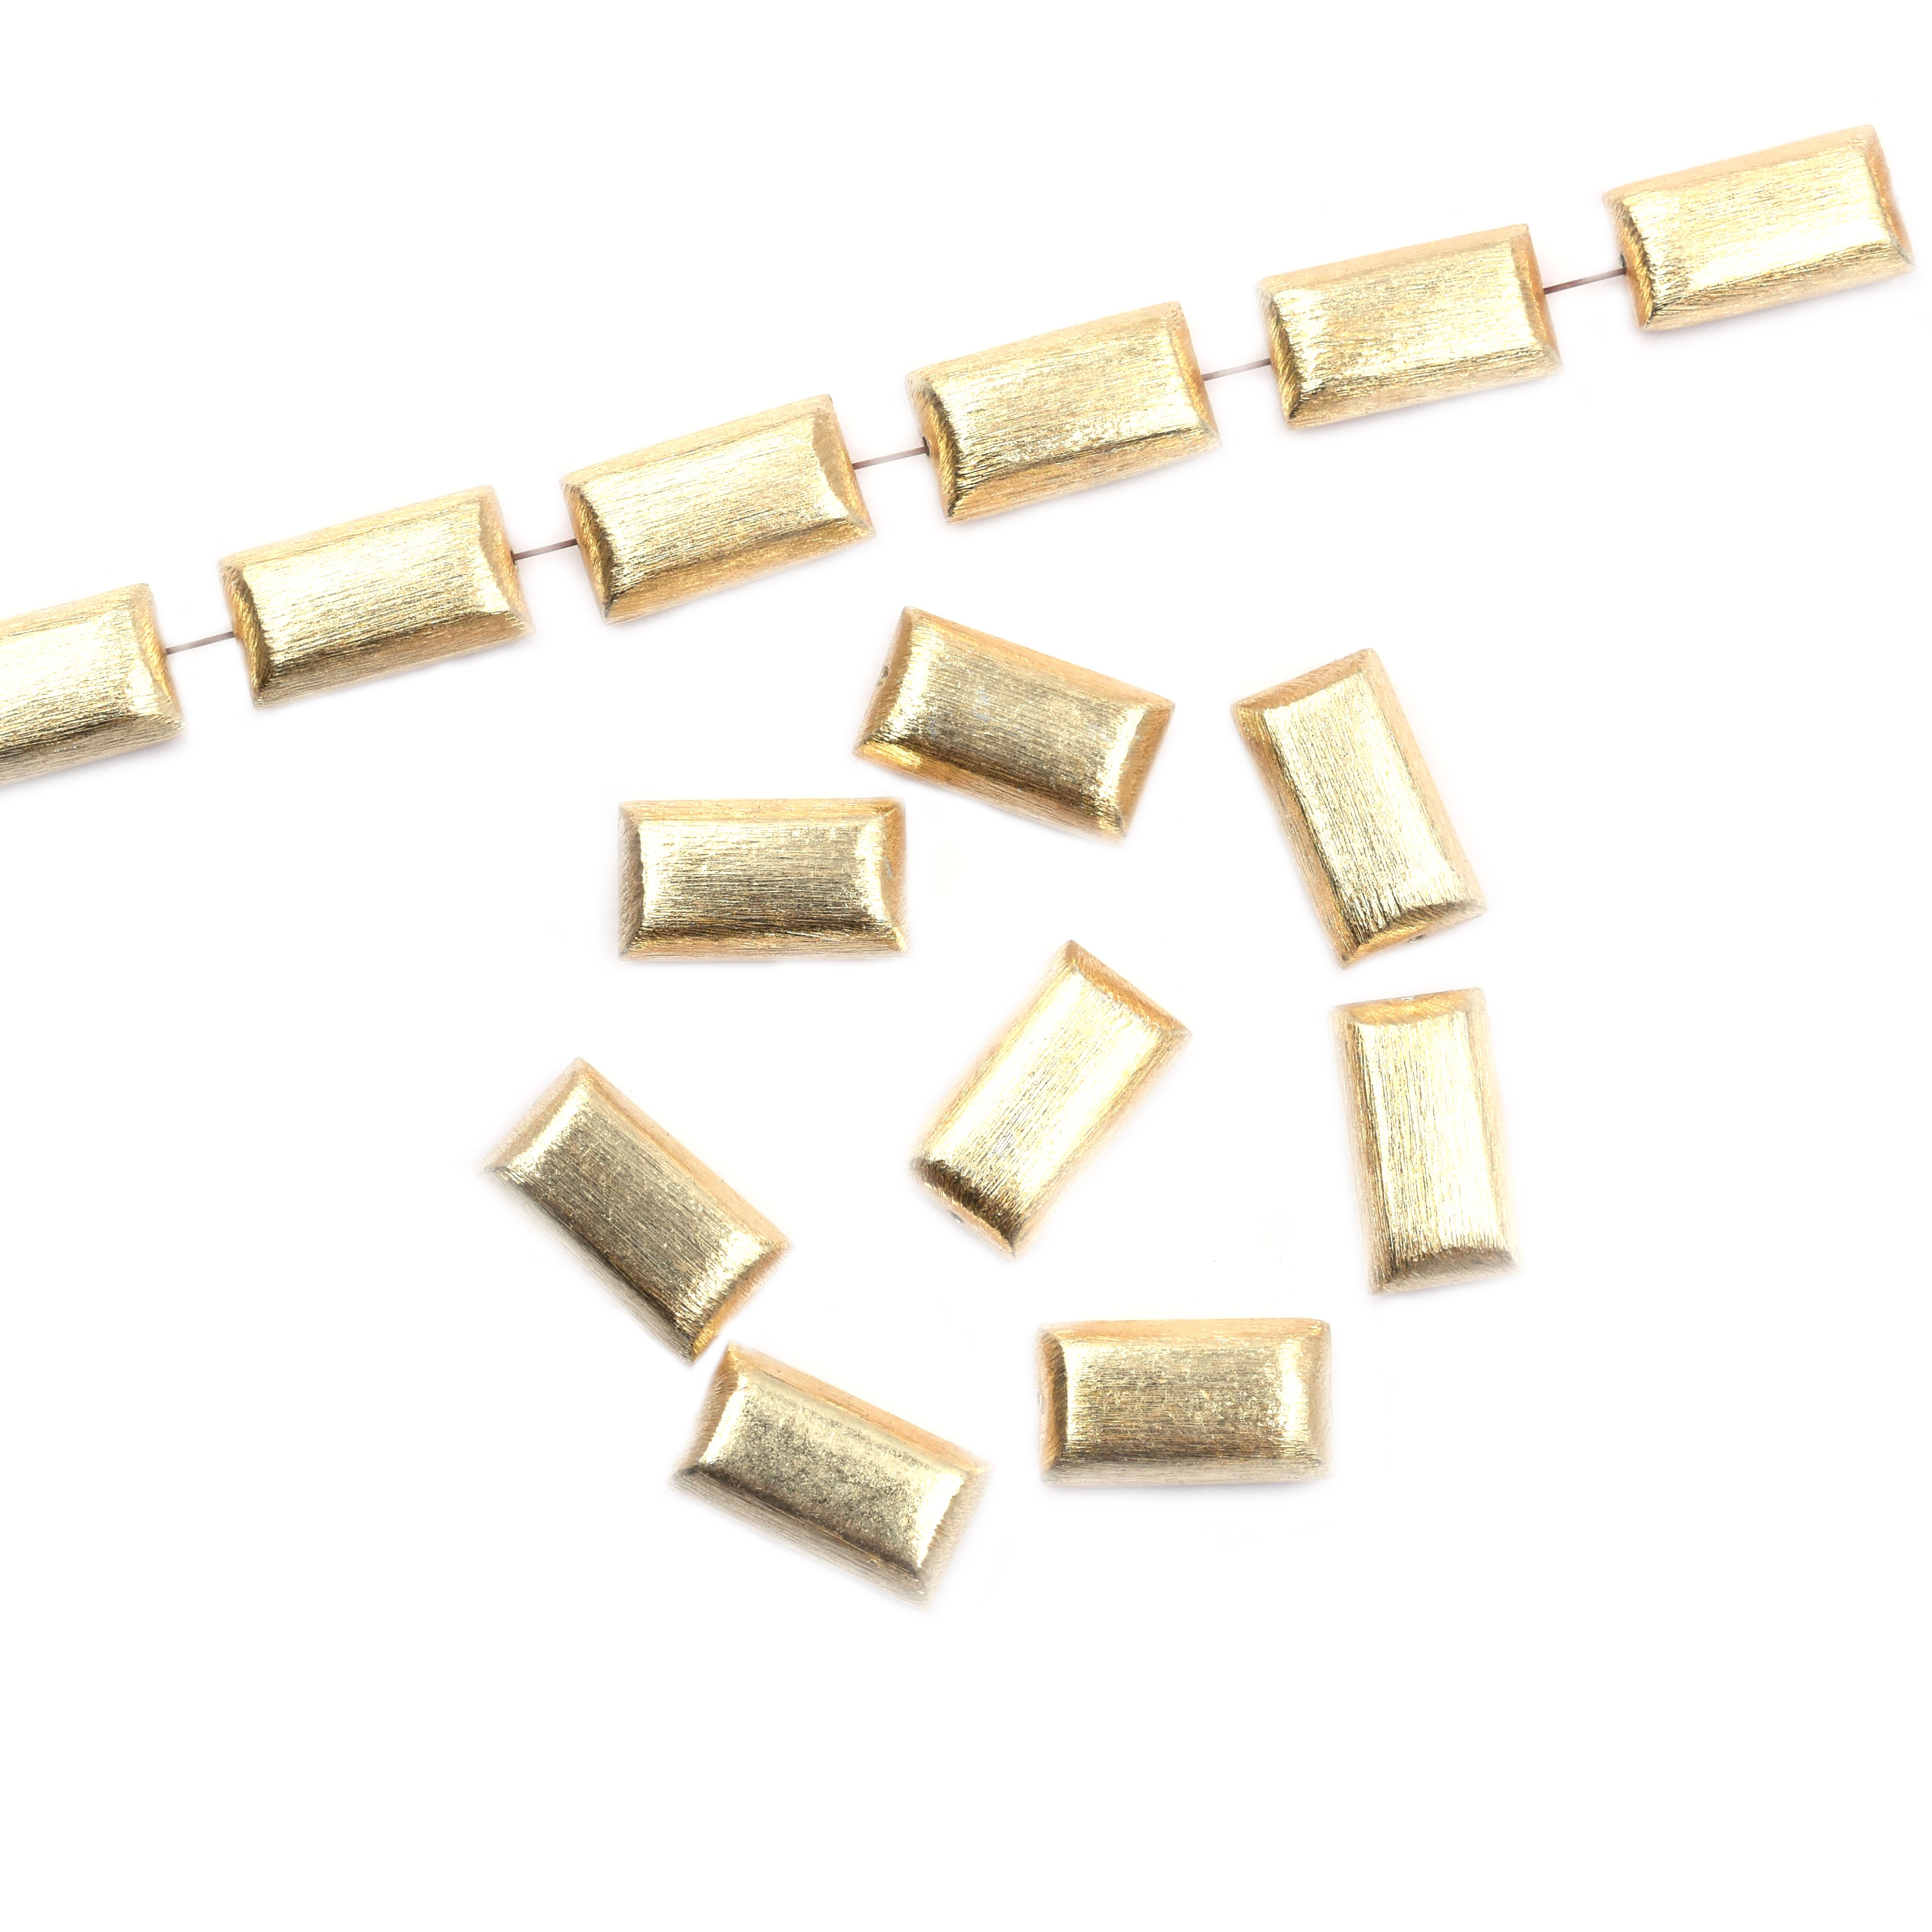 10 Pcs 18X10mm Biscuit Brushed Matte Finish Beads Gold Plated Copper